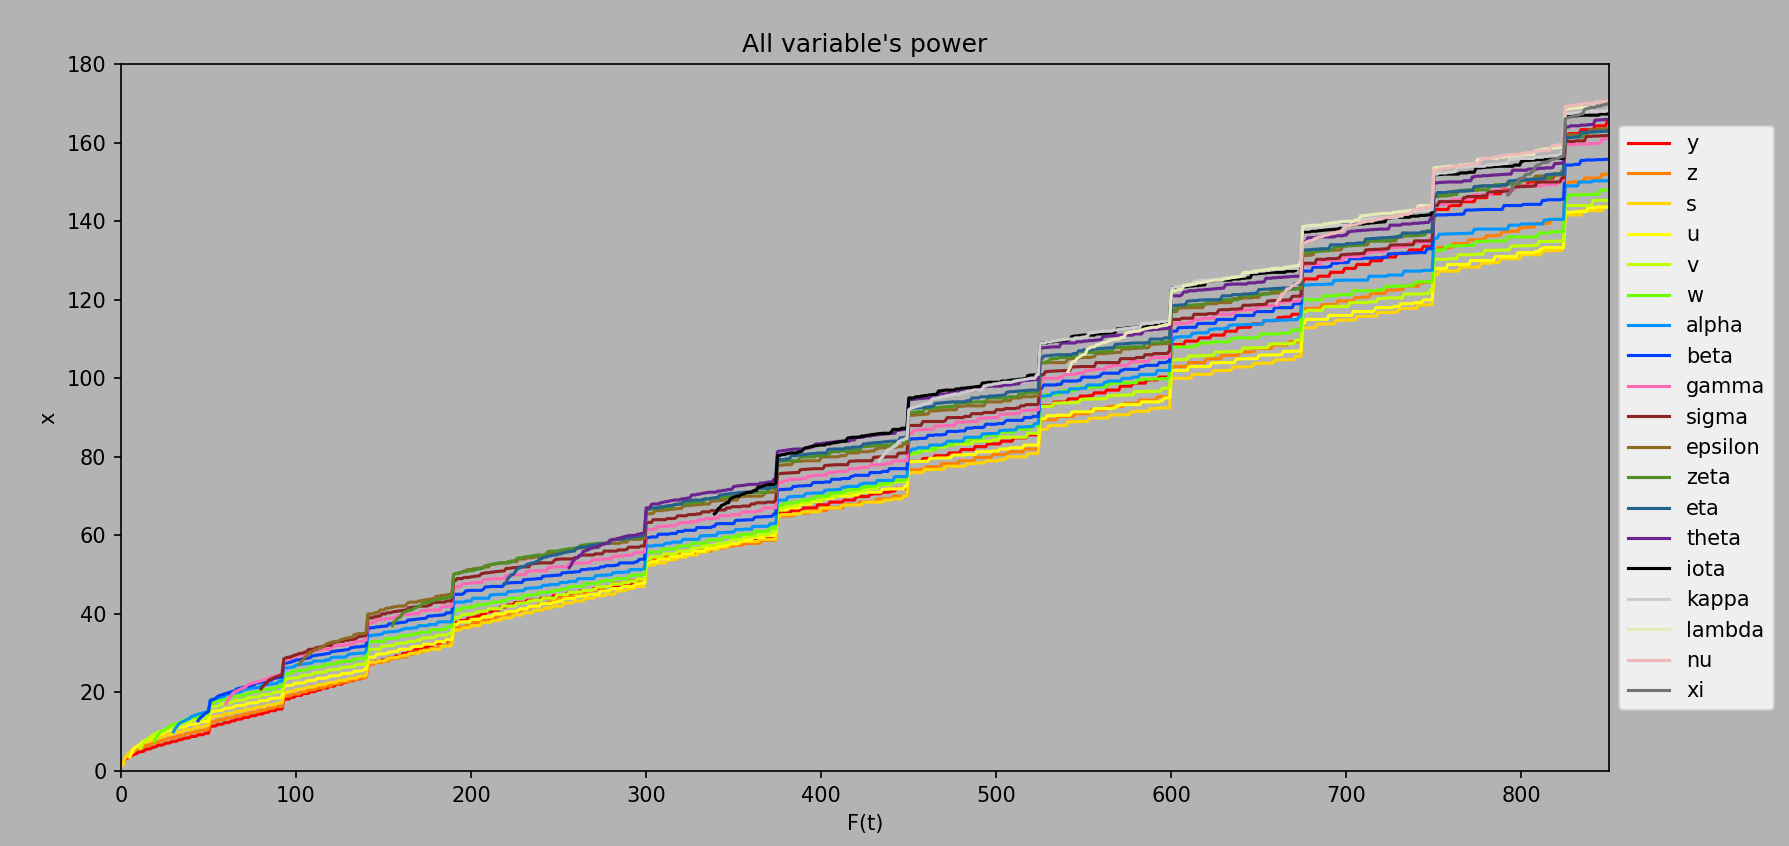 Variable power up to ee850